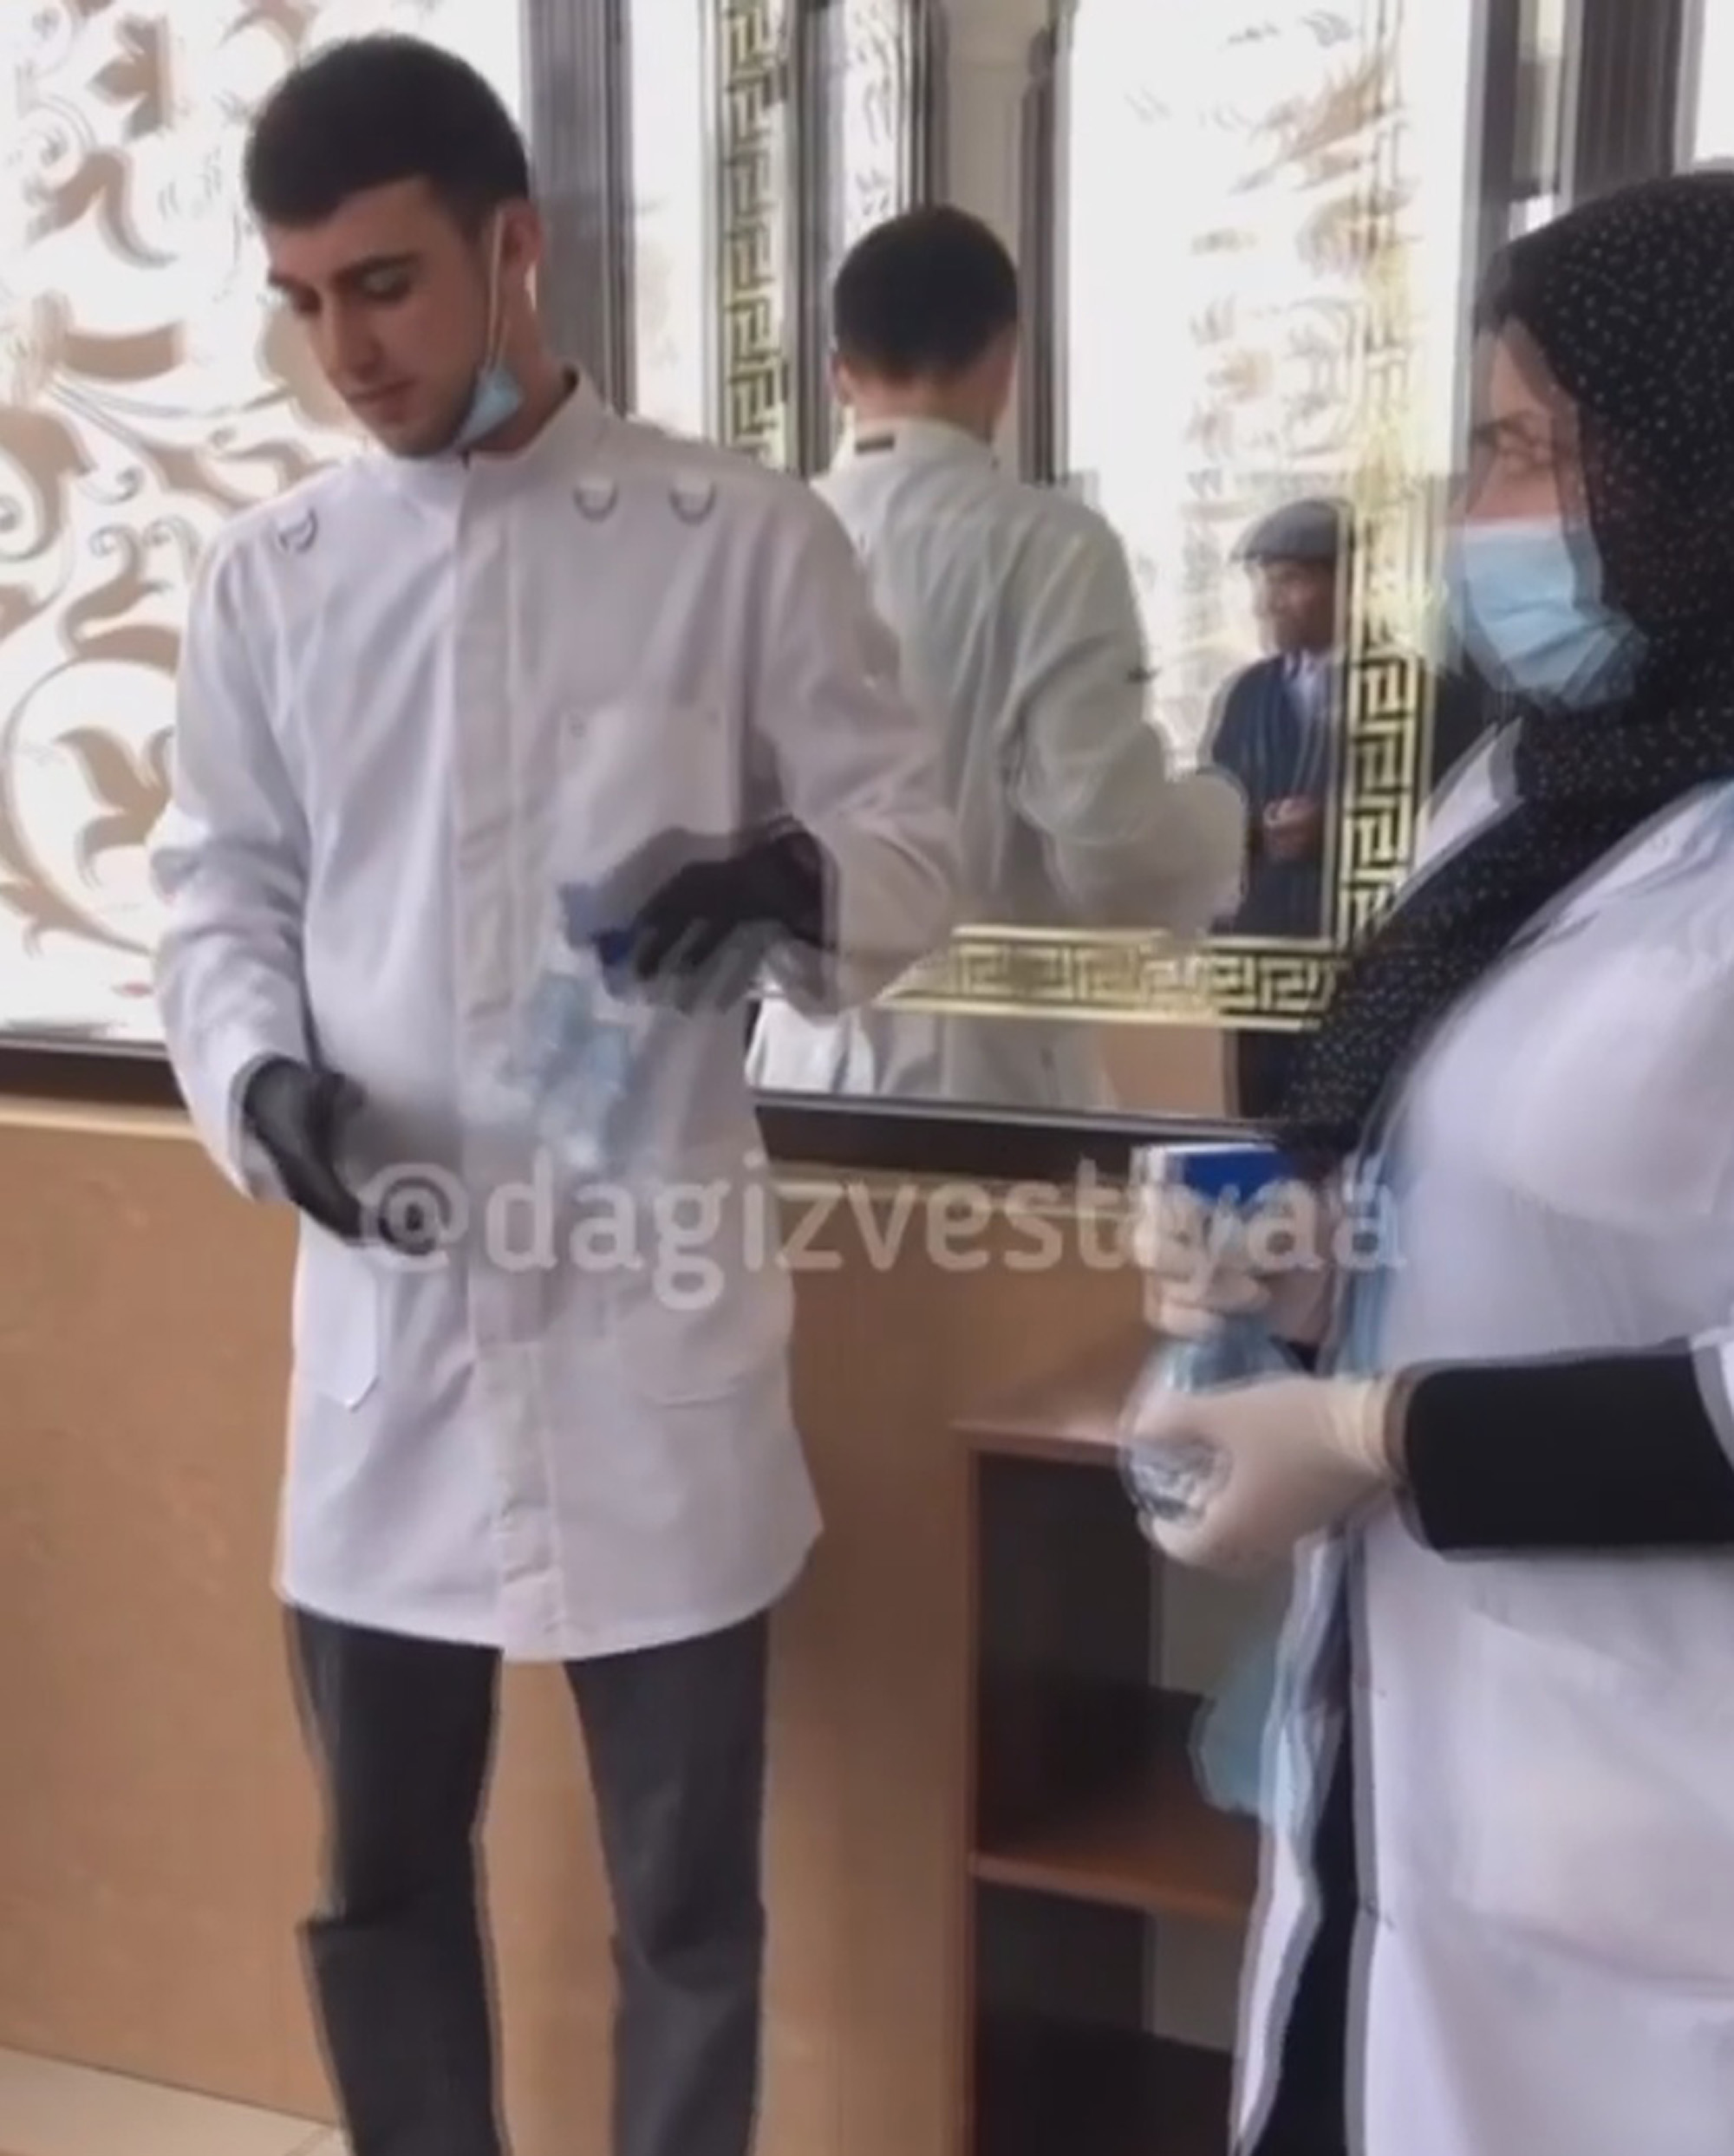 Read more about the article Moment Russian Wedding Guests Sprayed With Disinfectant